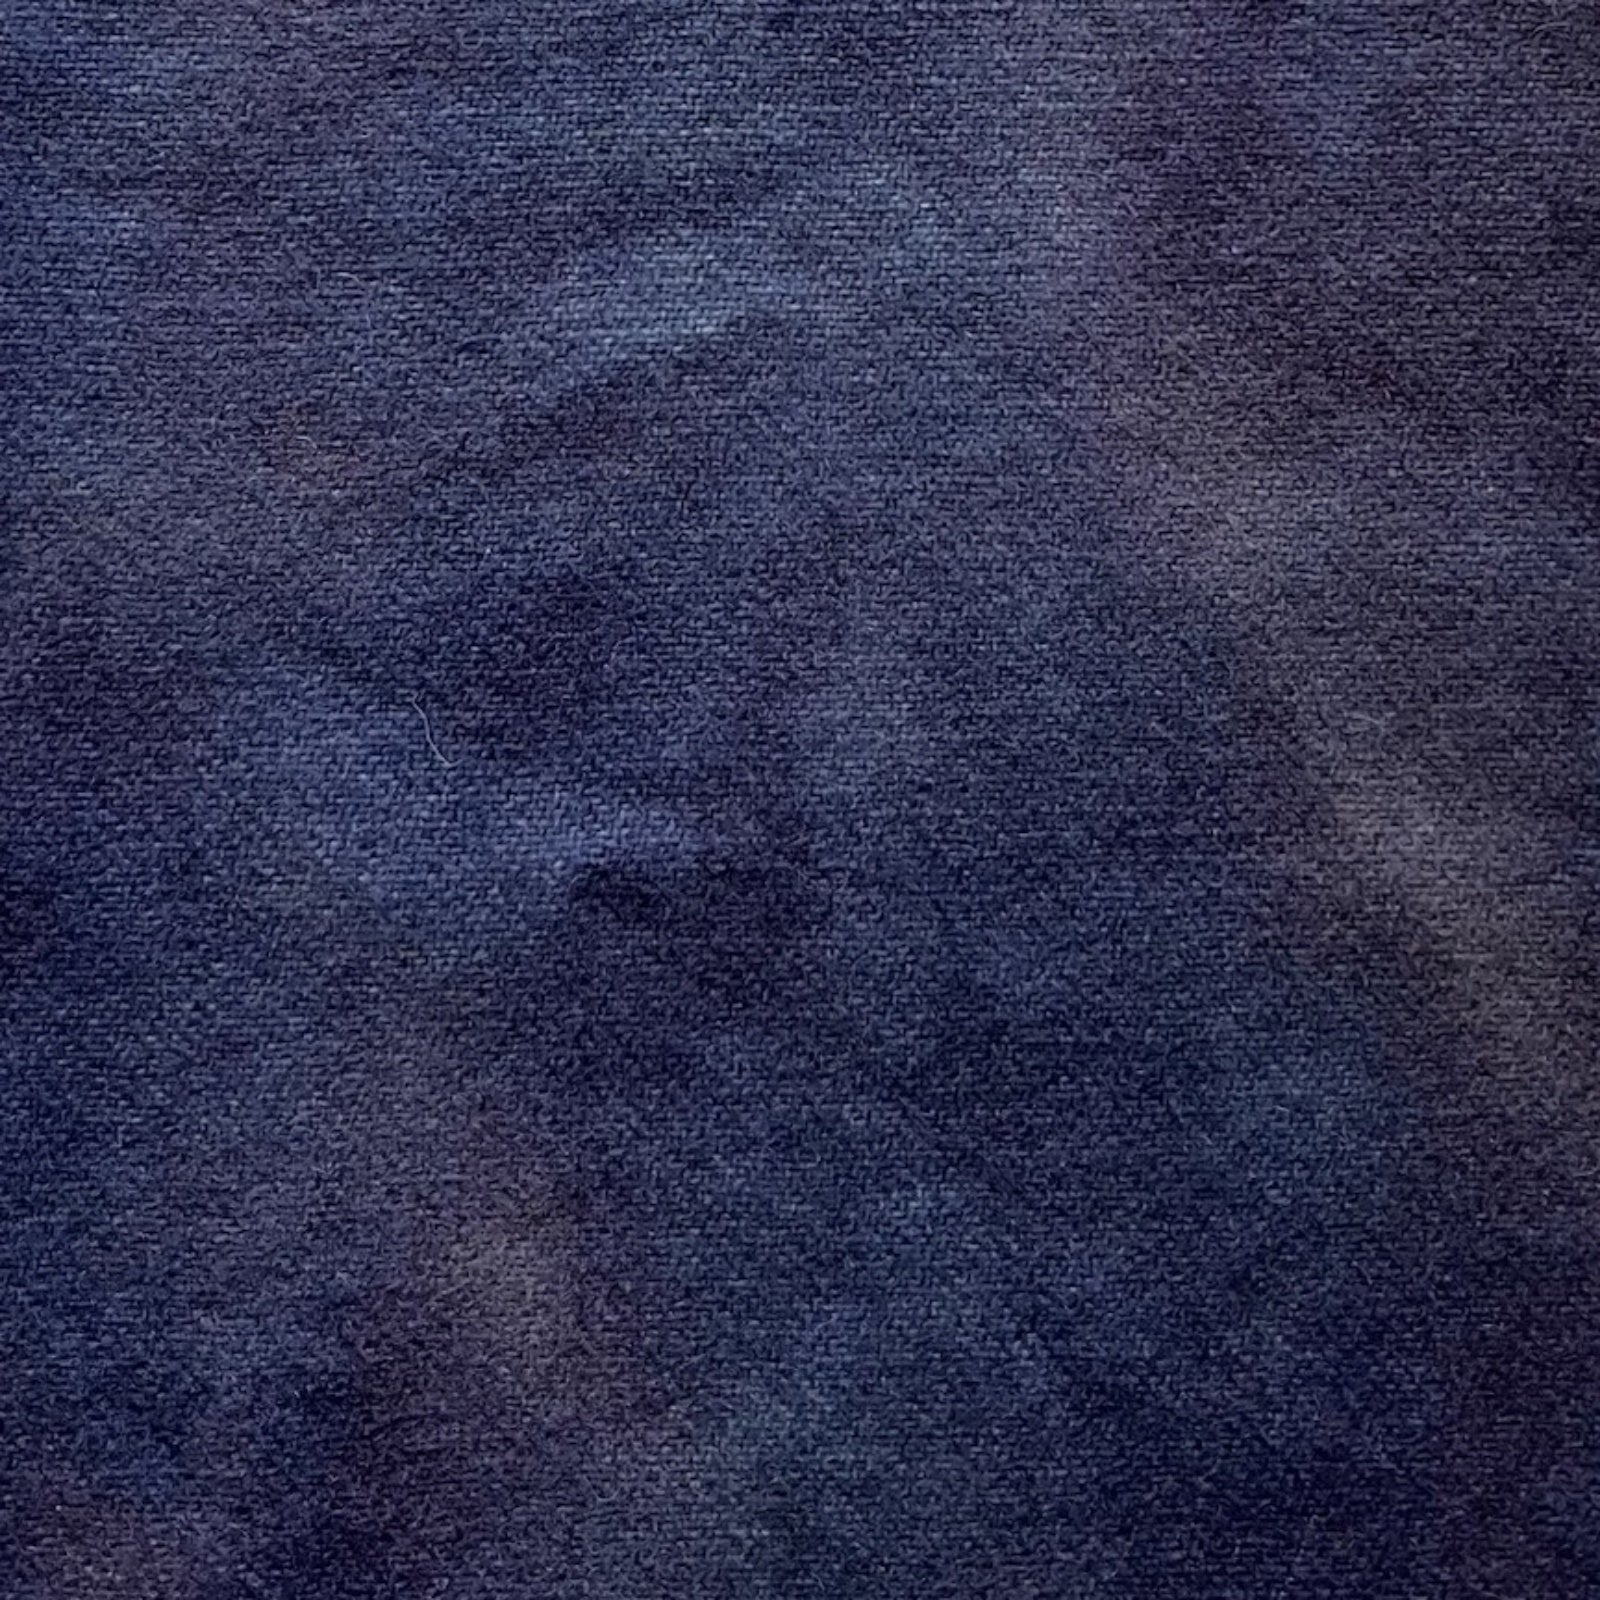 Yankee Blue - Colorama Hand Dyed Wool - Offered by HoneyBee Hive Rug Hooking